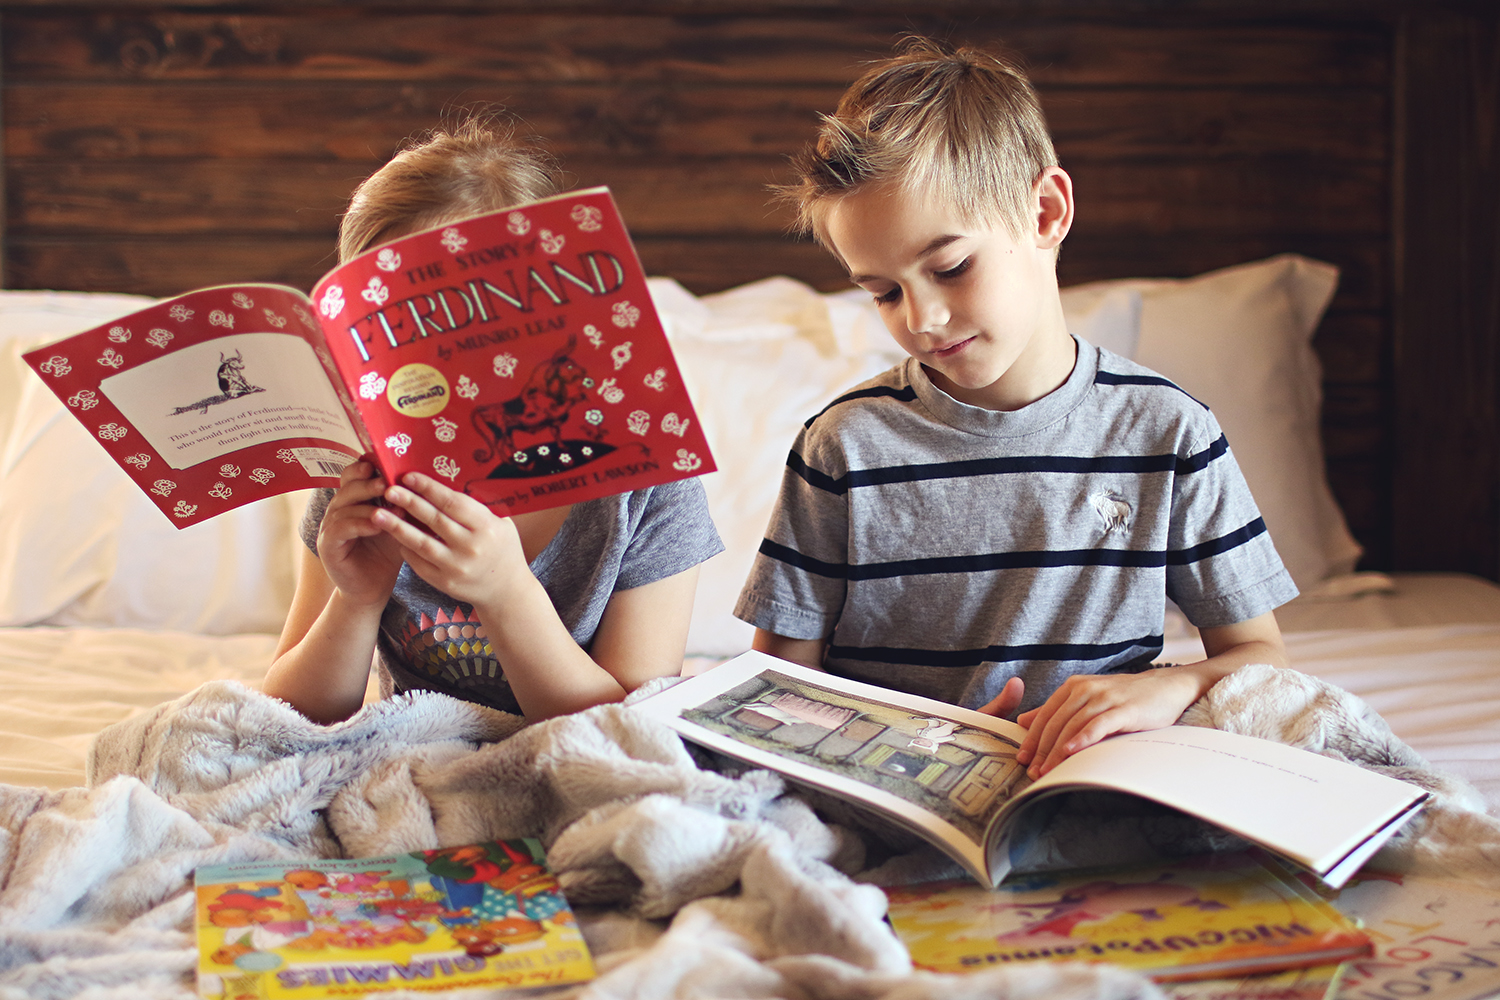 Favorite books for younger children and our current reads we are loving. Catch it all on Haus of Layne! #KidsBooks #ChildrensBooks #ReadingList #Reading #Homeschooling